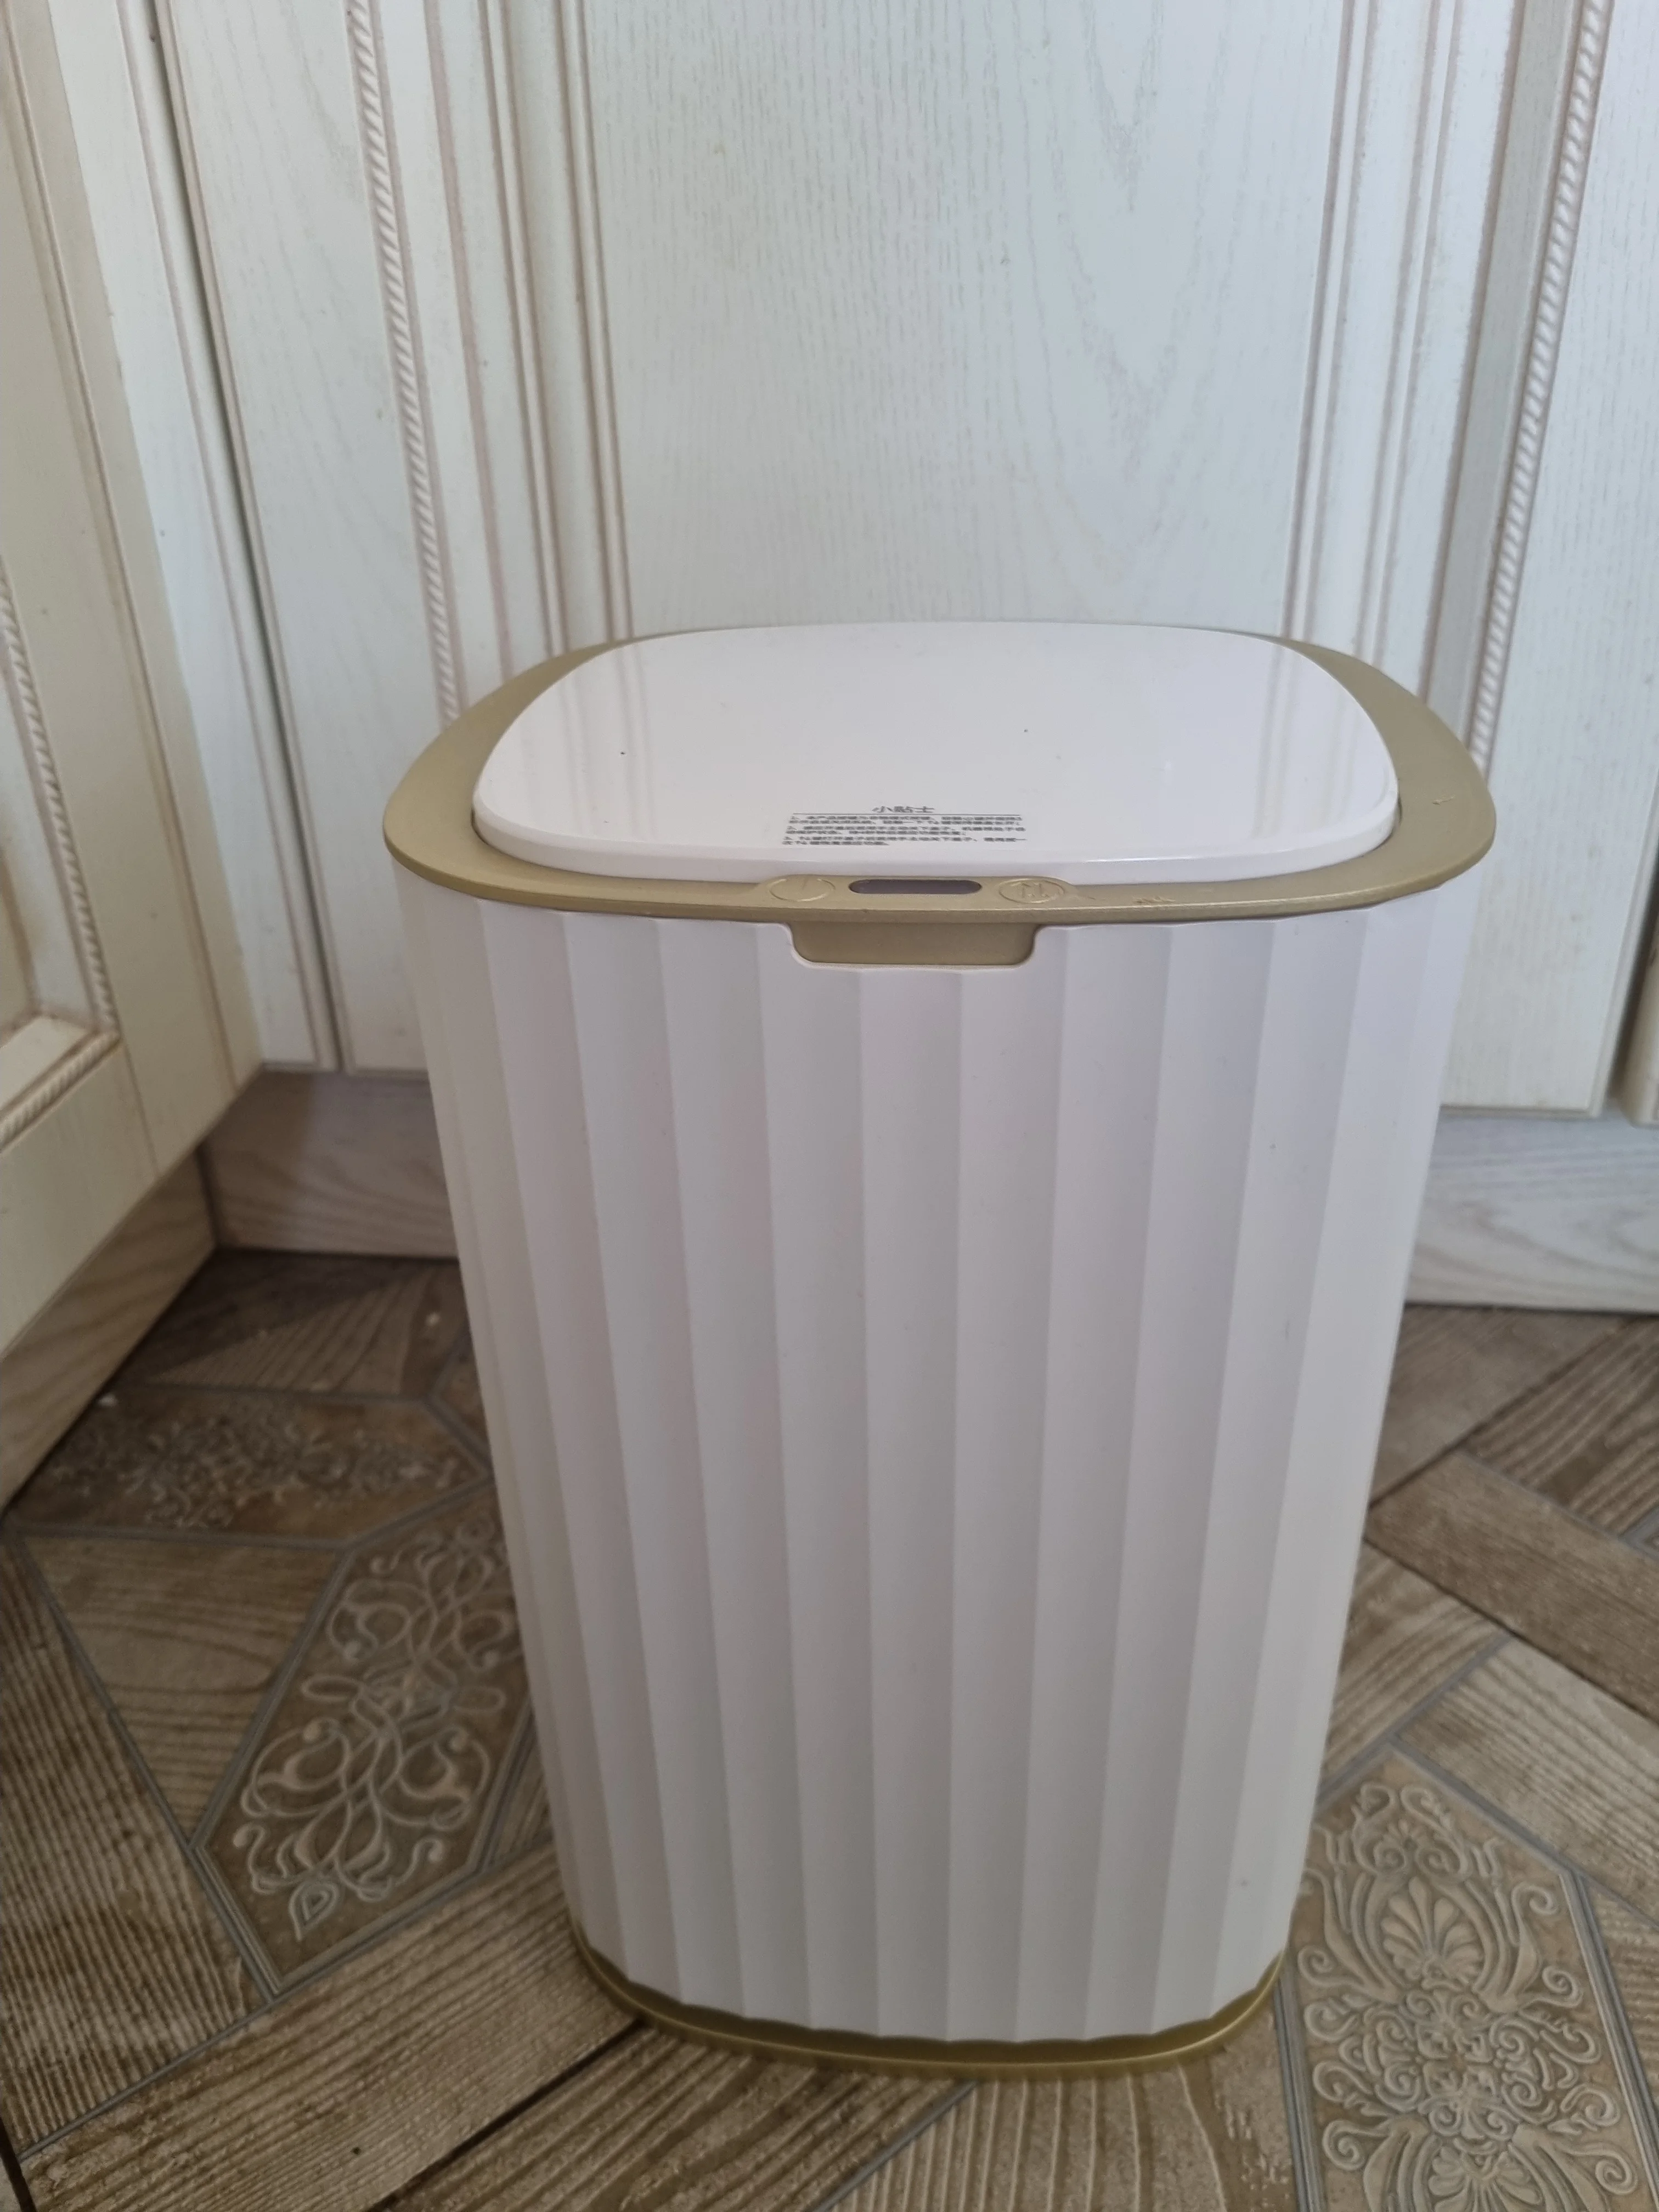 Smart Sensor Garbage Bin - Automatic Induction with Lid and Waterproof Design - Available in 10L/15L photo review